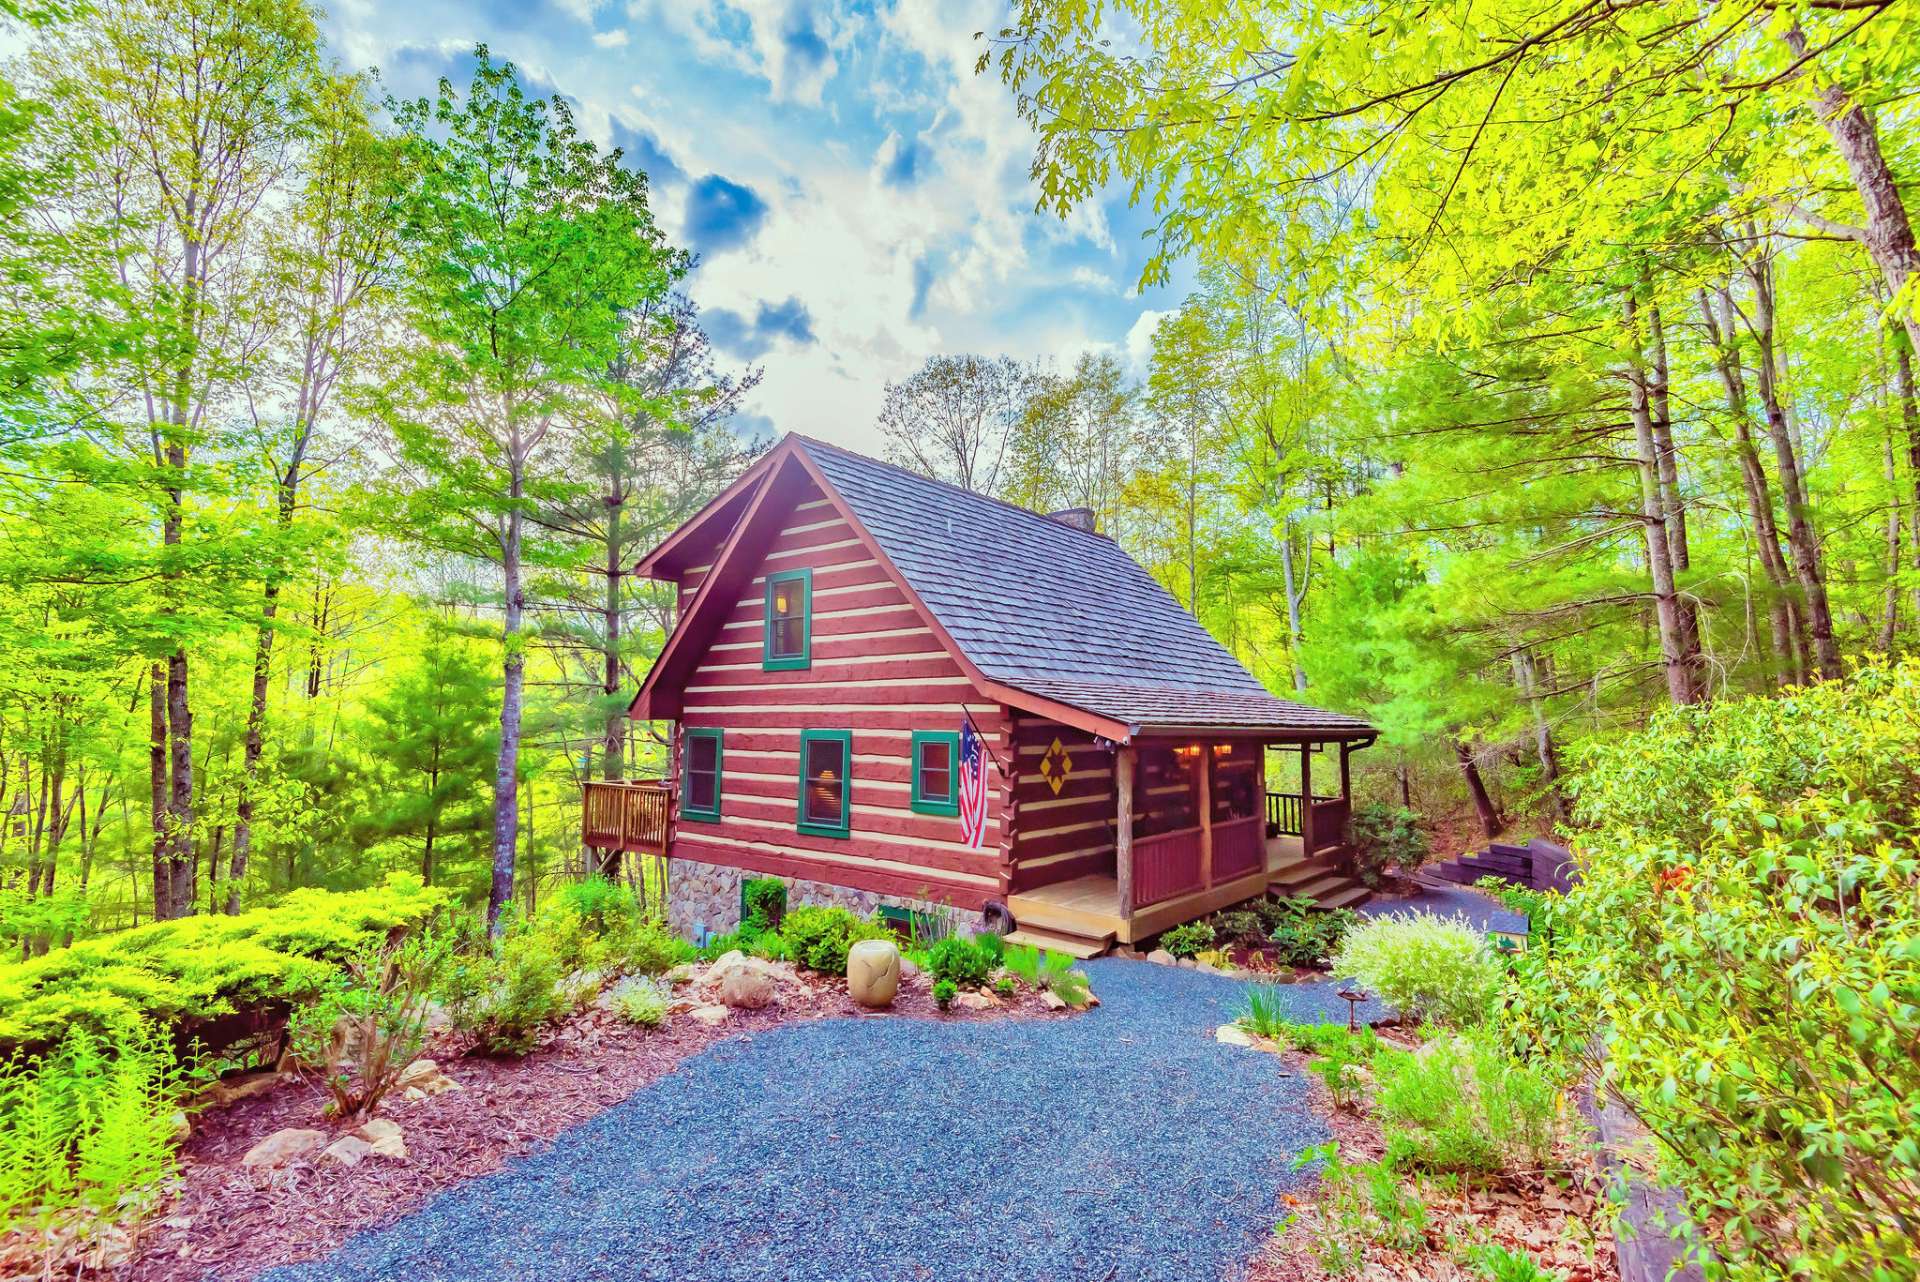 Surrounded by trees and native mountain foliage, this sweet cabin welcomes you to experience true log cabin living.